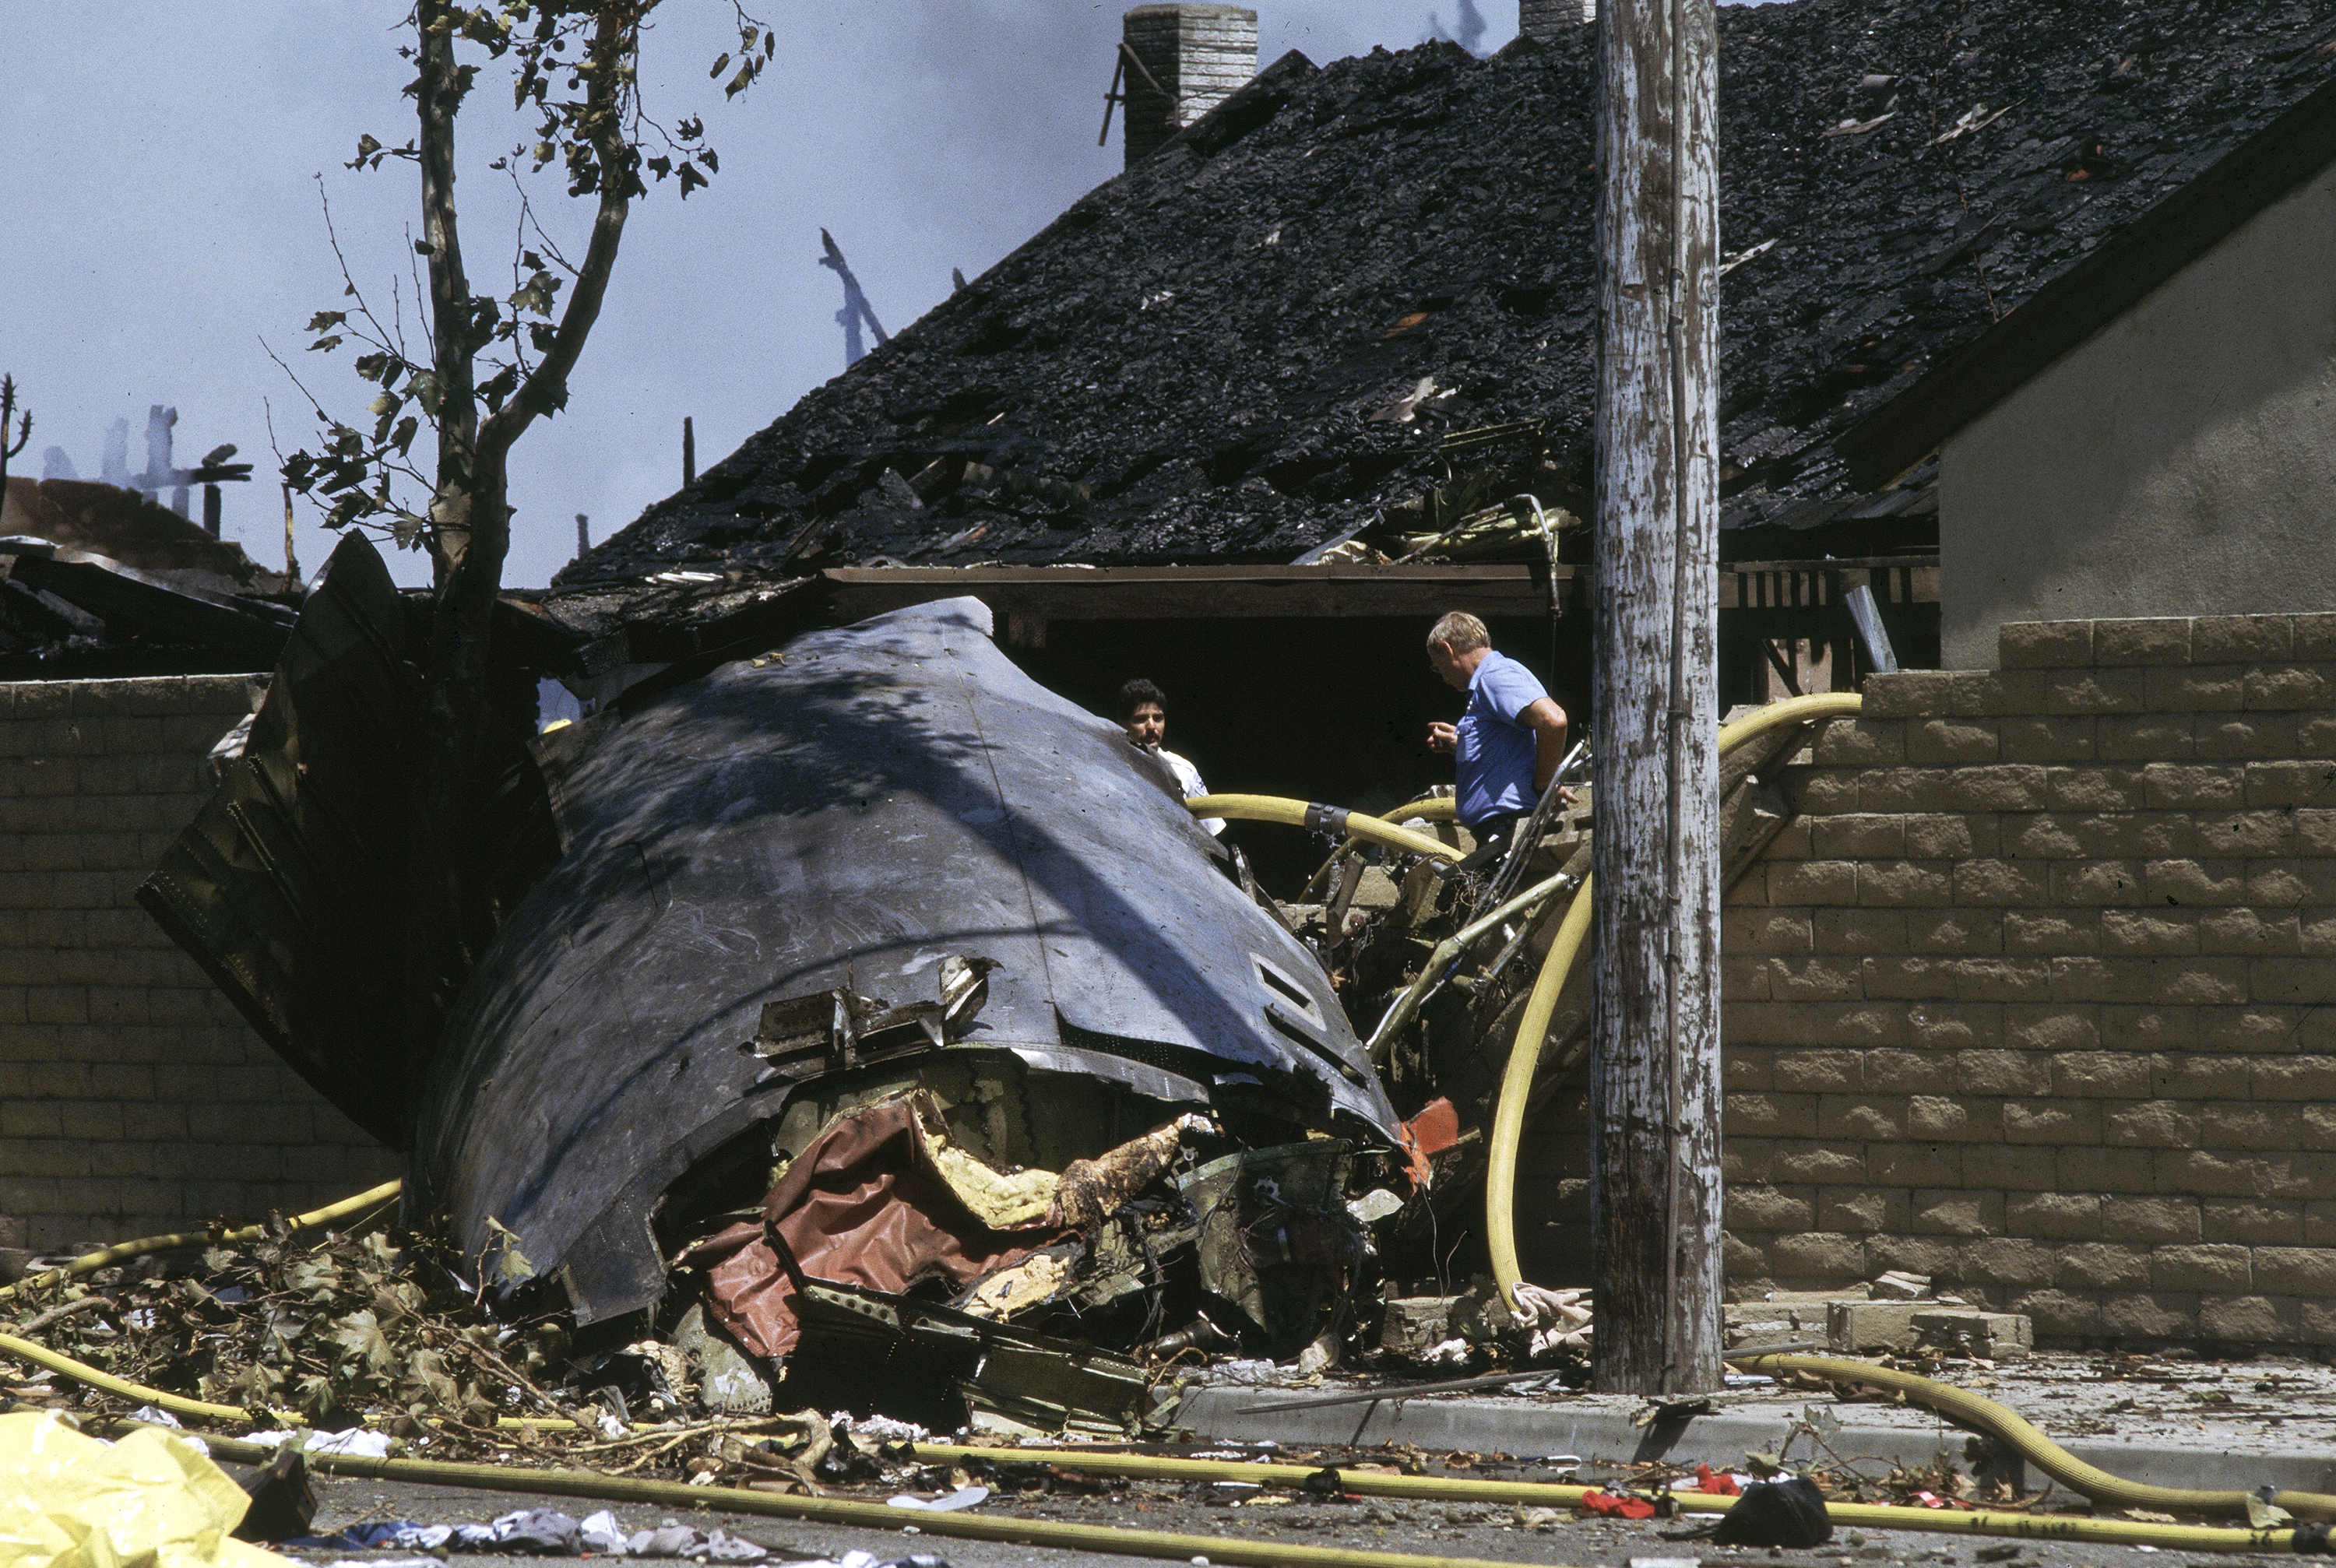 How the deadly 1986 Cerritos midair collision ultimately made air